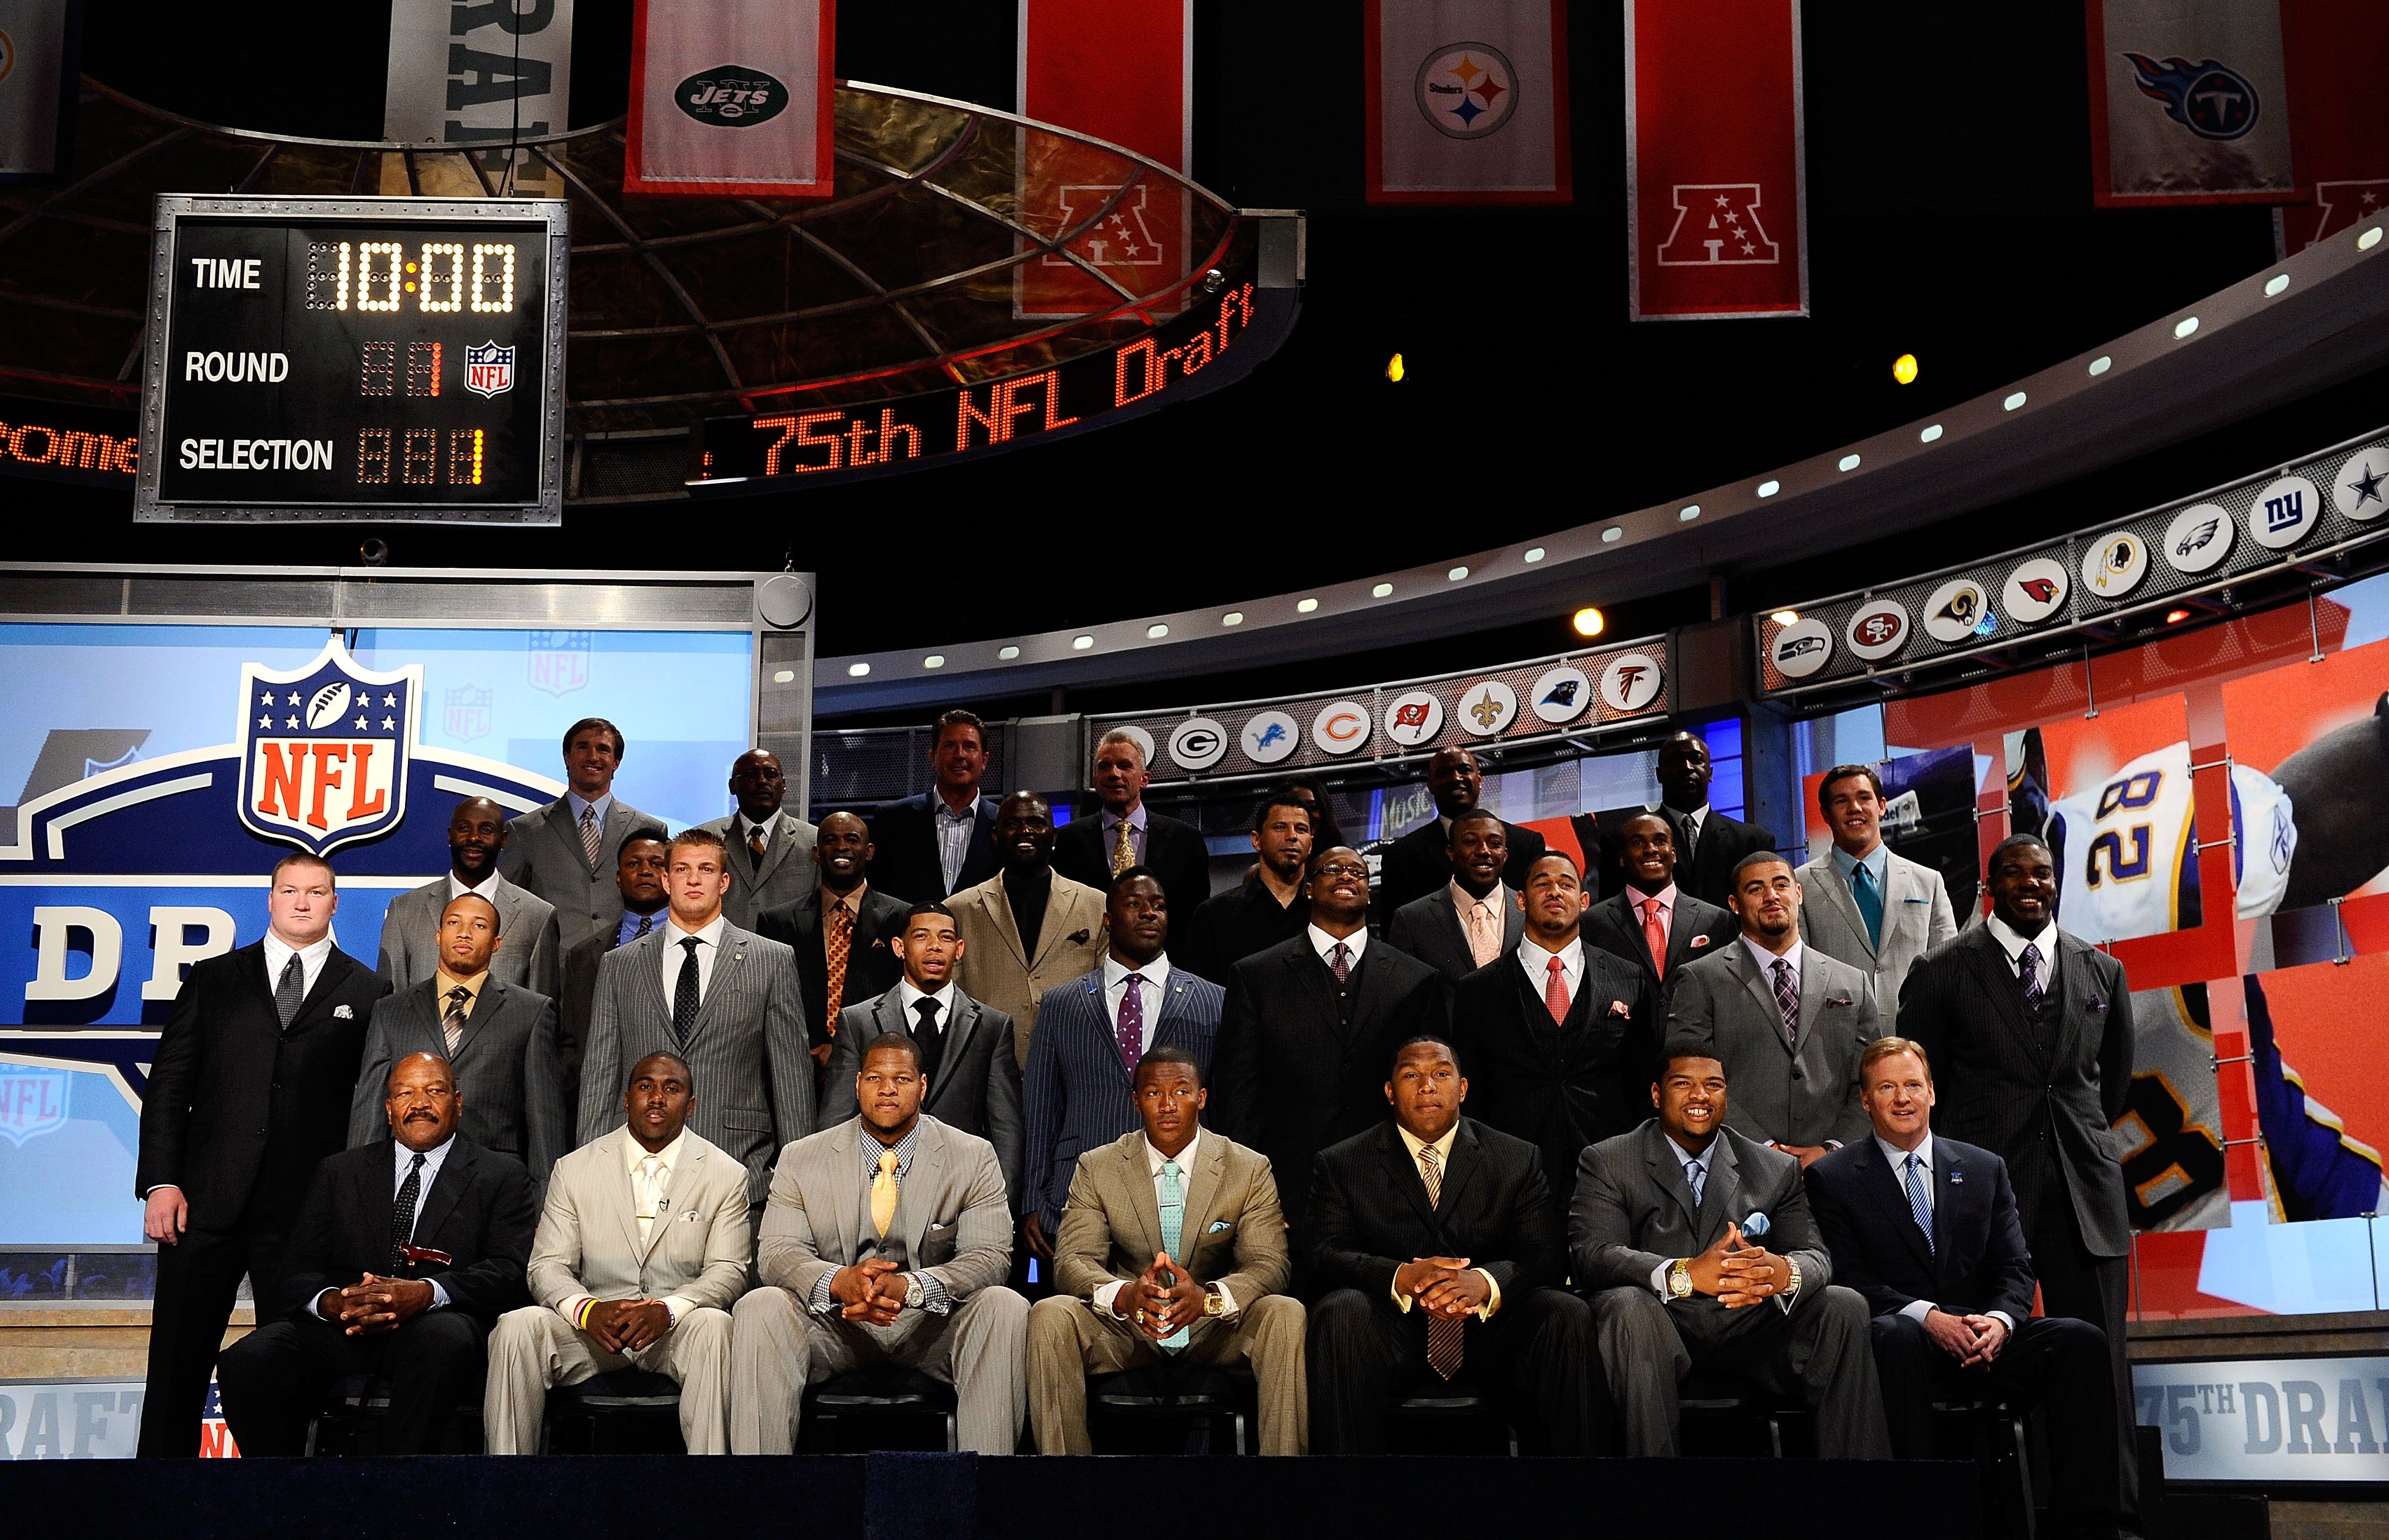 2011 NFL Draft: Ranking the Best First-Round Picks of All Time, Nos. 1